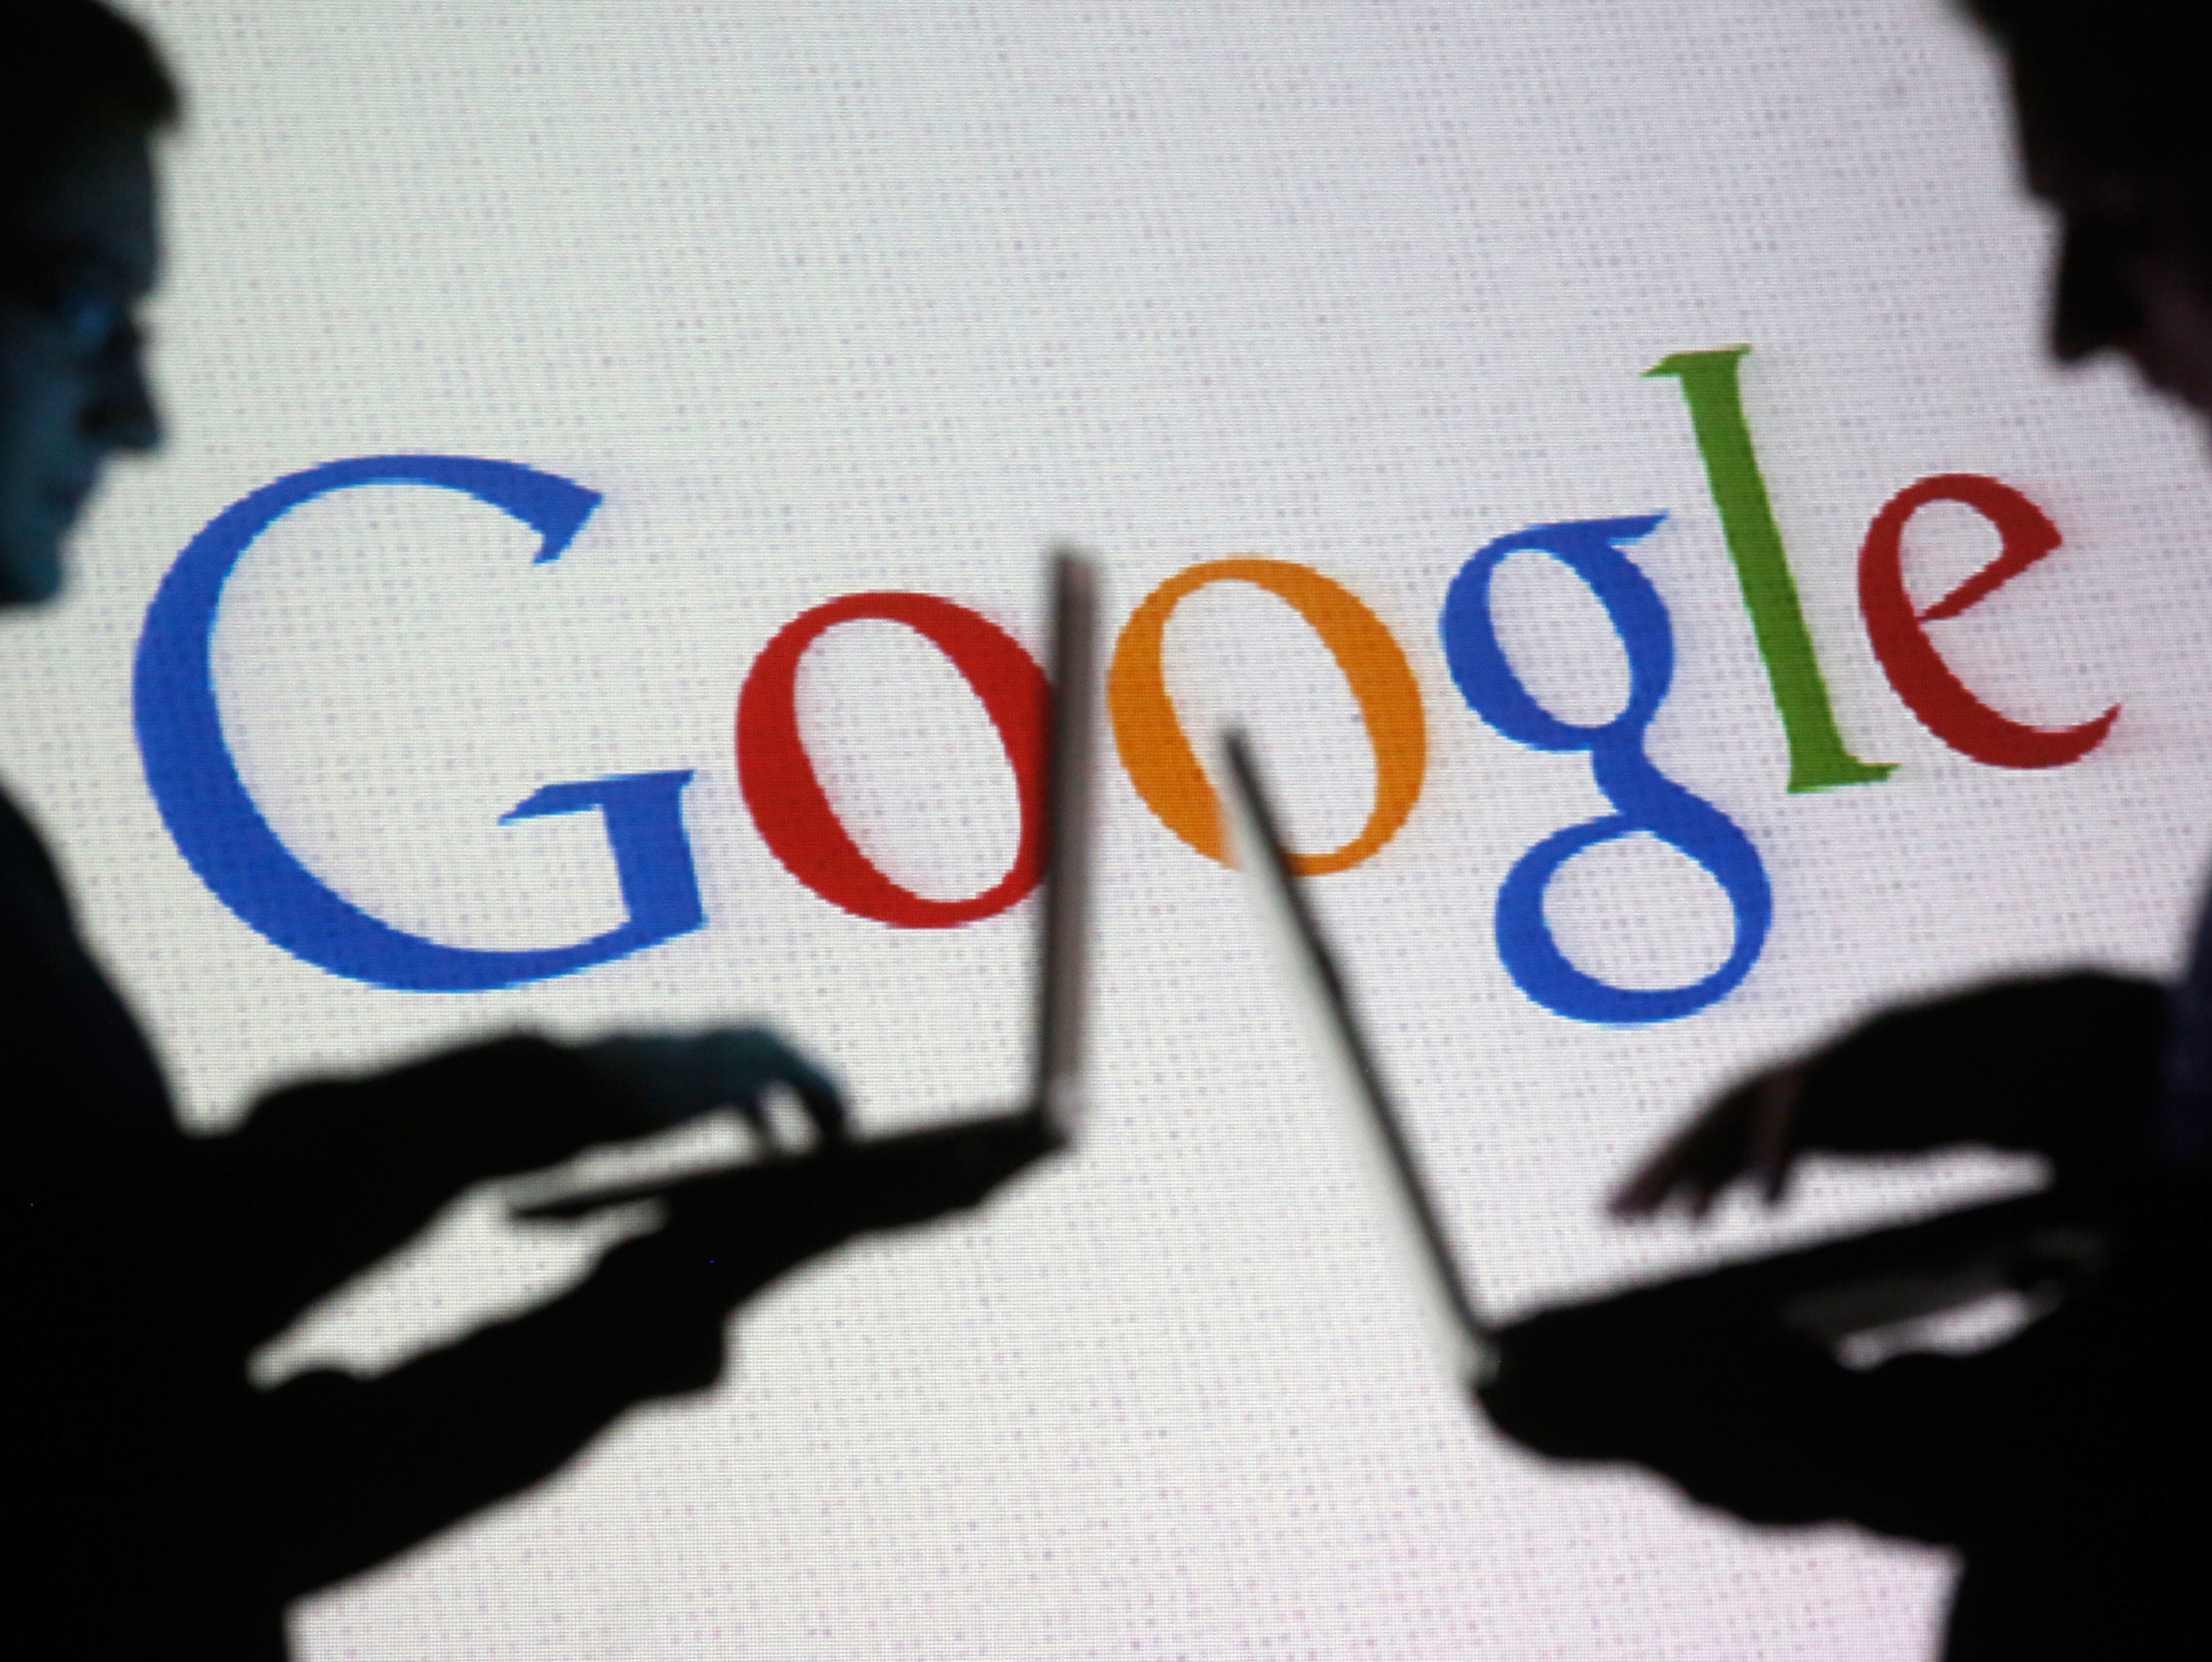 Google wins battle to apply 'right to be forgotten' rule in Europe only